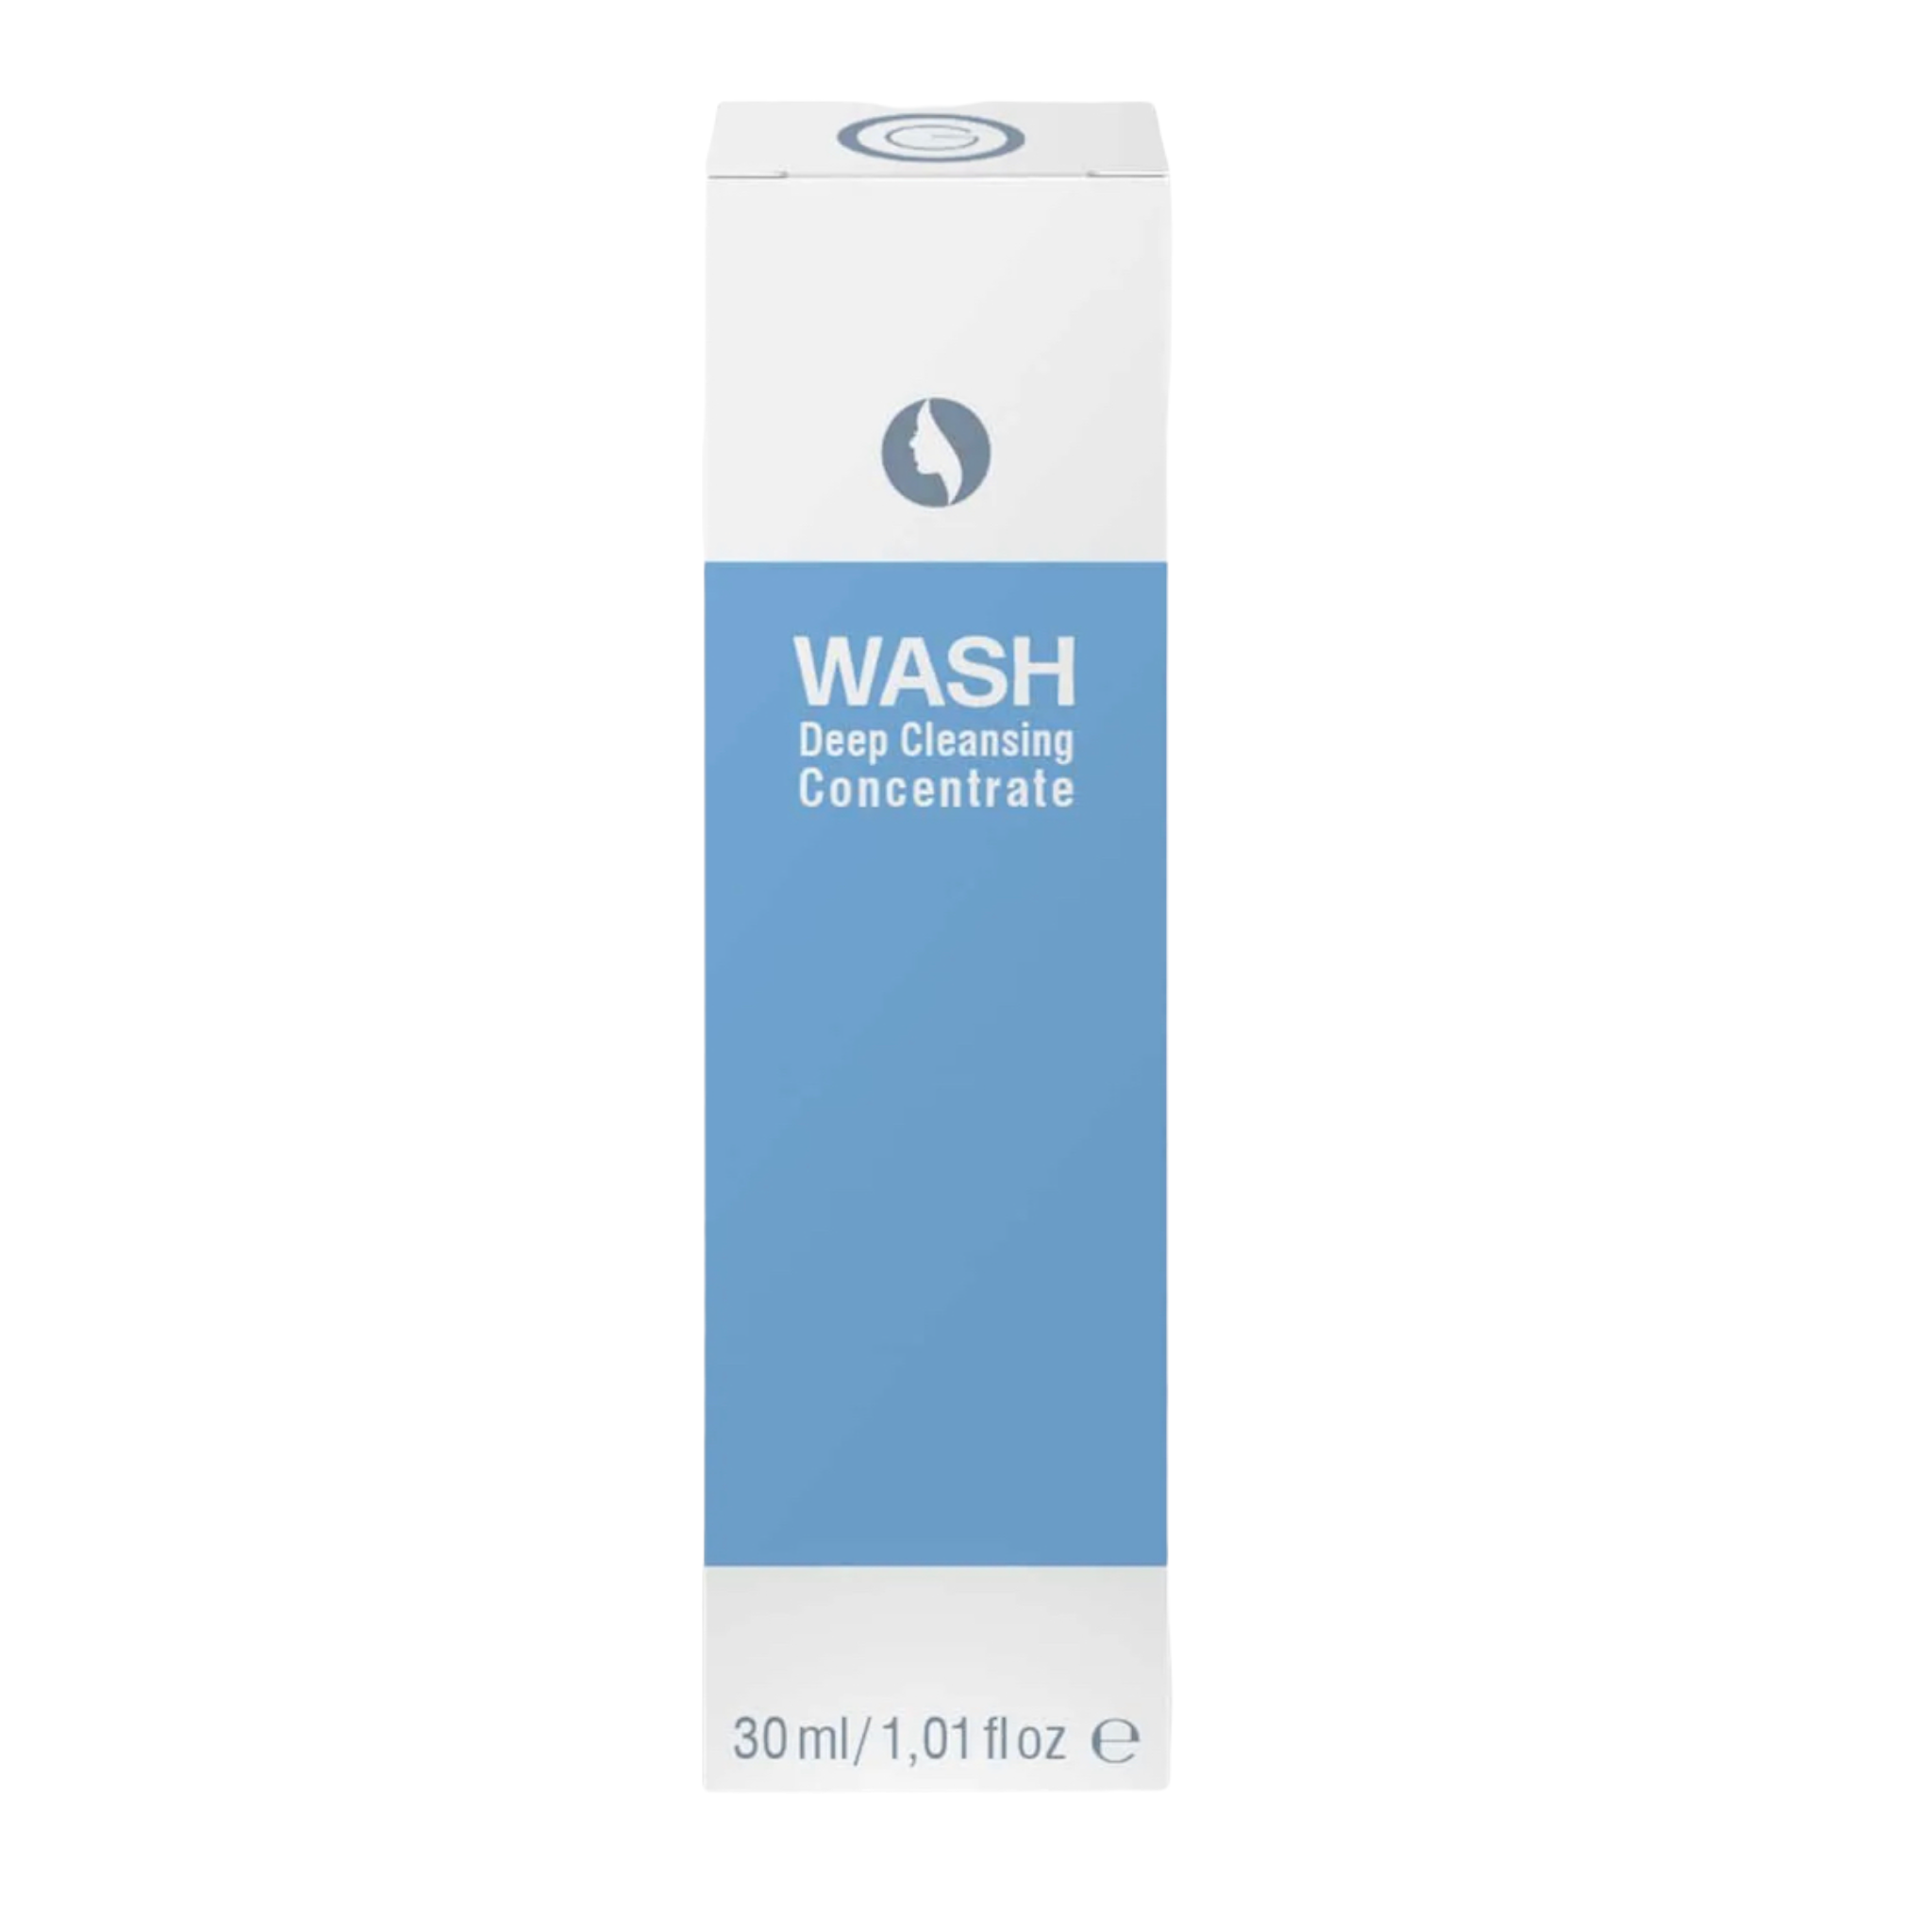 WASH- Deep Cleansing Concentrate Goldeneye Coloressence